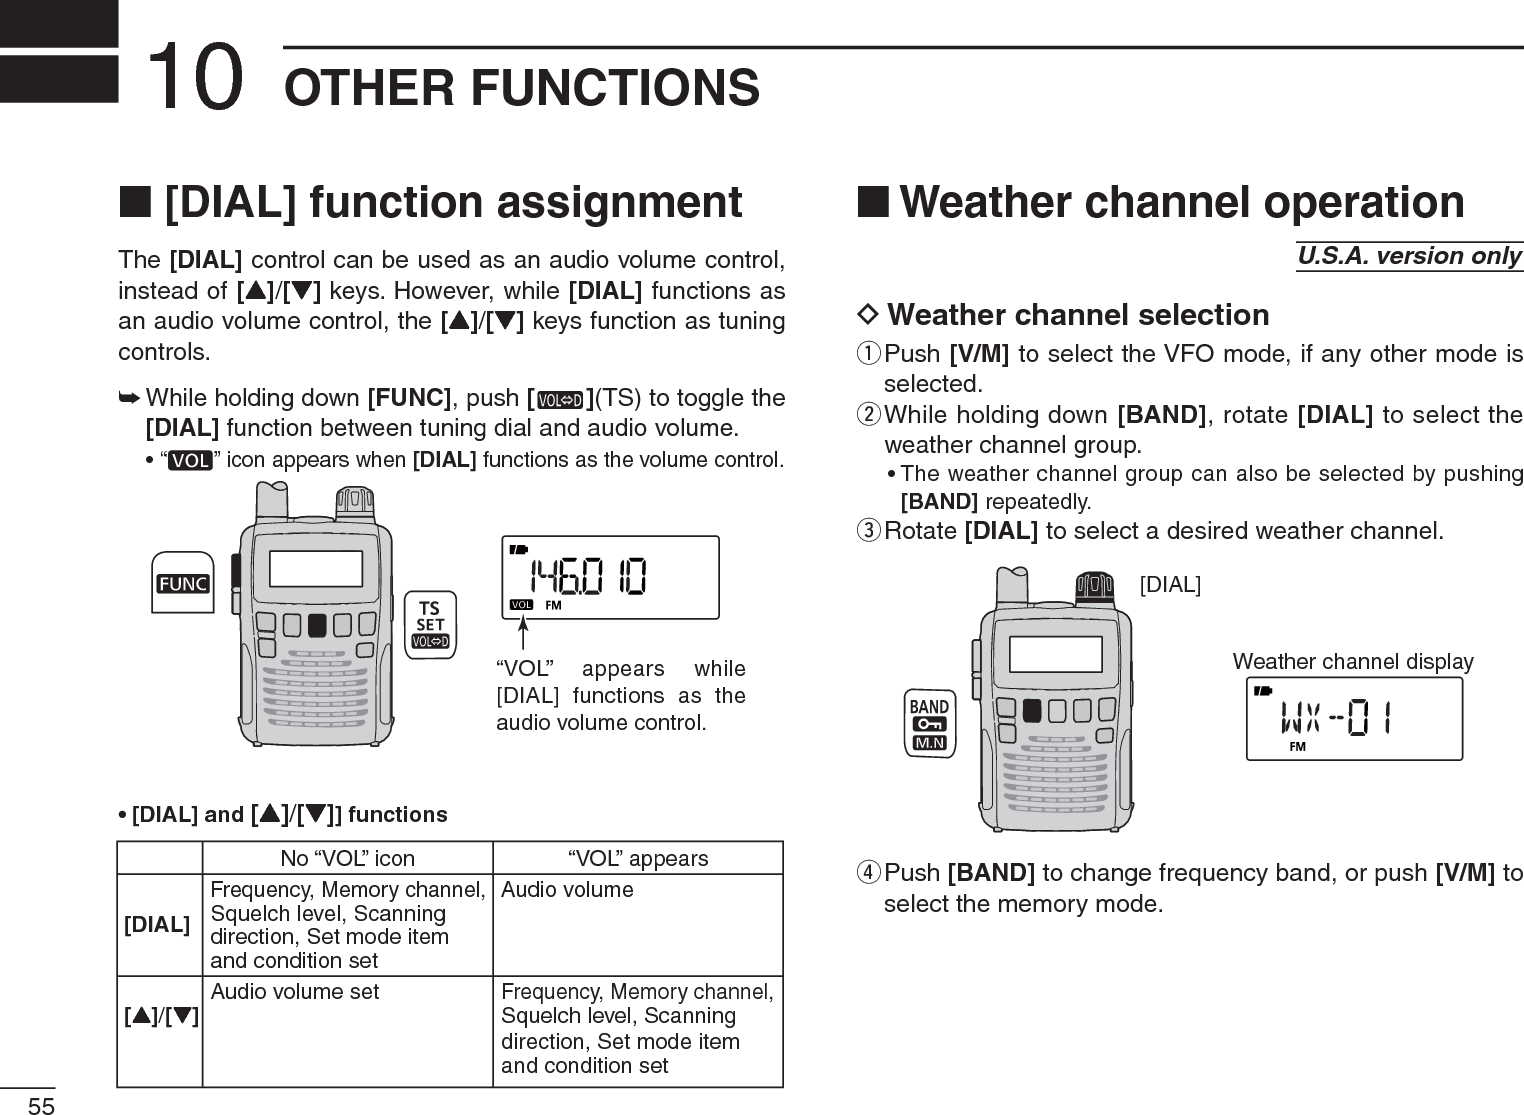 55OTHER FUNCTIONS10N [DIAL] function assignmentThe [DIAL] control can be used as an audio volume control, instead of [Y]/[Z] keys. However, while [DIAL] functions as an audio volume control, the [Y]/[Z] keys function as tuning controls.±  While holding down [FUNC], push [ ](TS) to toggle the [DIAL] function between tuning dial and audio volume.•“ ” icon appears when [DIAL] functions as the volume control.“VOL” appears while[DIAL] functions as theaudio volume control.• [DIAL] and [Y]/[Z]] functionsN Weather channel operationU.S.A. version onlyD Weather channel selectionq  Push [V/M] to select the VFO mode, if any other mode is selected.w  While holding down [BAND], rotate [DIAL] to select the weather channel group.• The weather channel group can also be selected by pushing [BAND] repeatedly.eRotate [DIAL] to select a desired weather channel. [DIAL]Weather channel displayr  Push [BAND] to change frequency band, or push [V/M] to select the memory mode.No “VOL” icon “VOL” appearsFrequency, Memory channel,Audio volume [DIAL] Squelch level, Scanningdirection, Set mode item and condition setAudio volume setFrequency, Memory channel,[Y]/[Z]Squelch level, Scanning     direction, Set mode item    and condition set